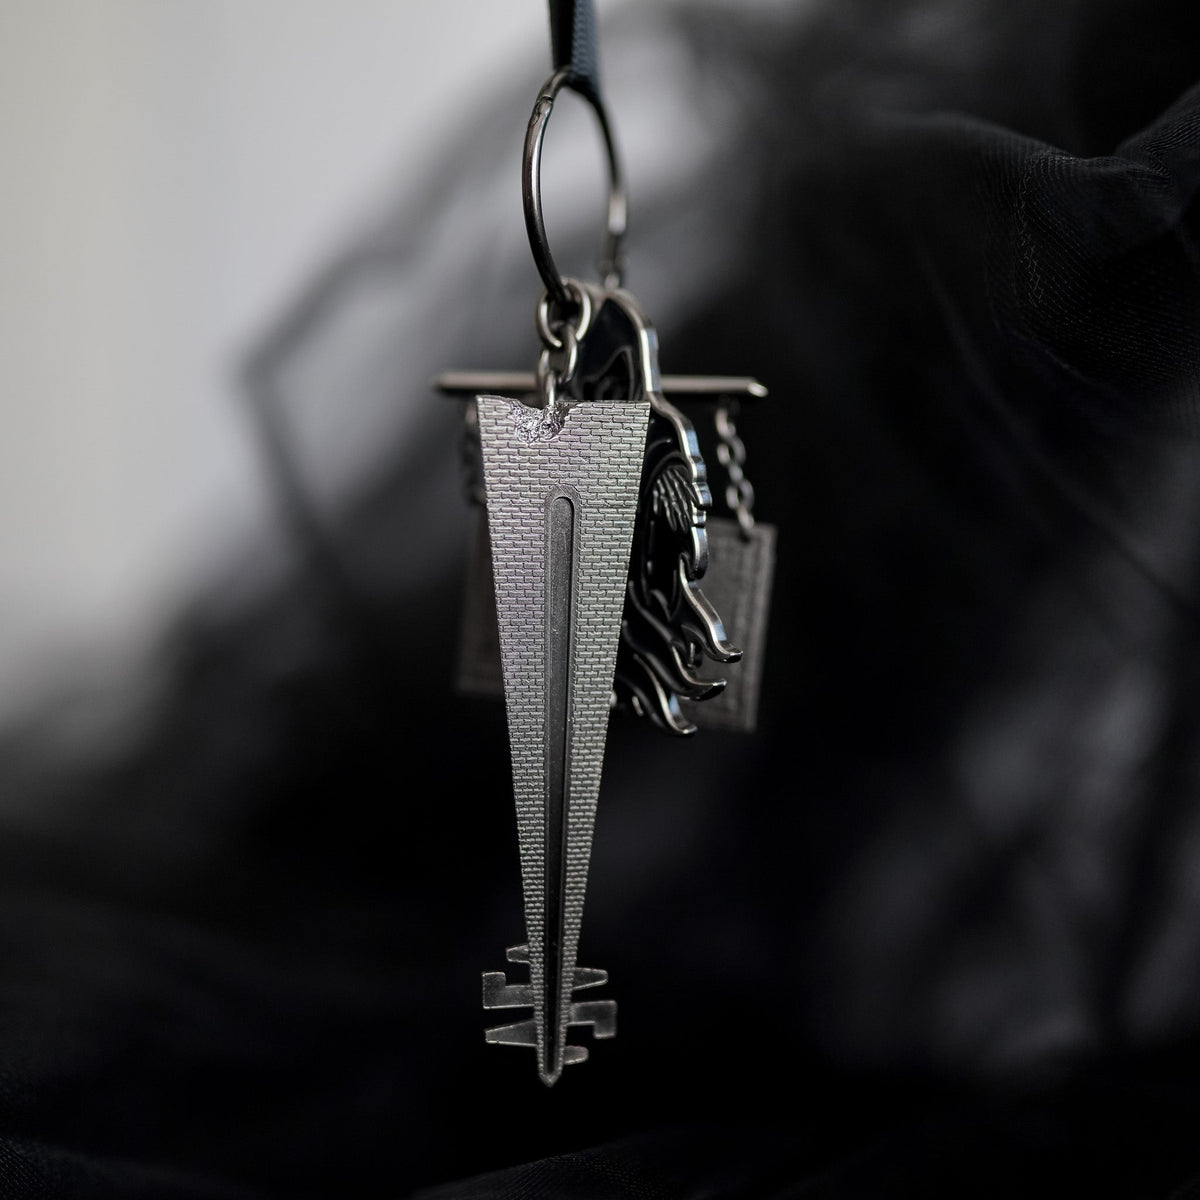 Wizard Prison Collectible Key #18 from LitJoy Crate | Collectibles &amp; Gifts for Booklovers